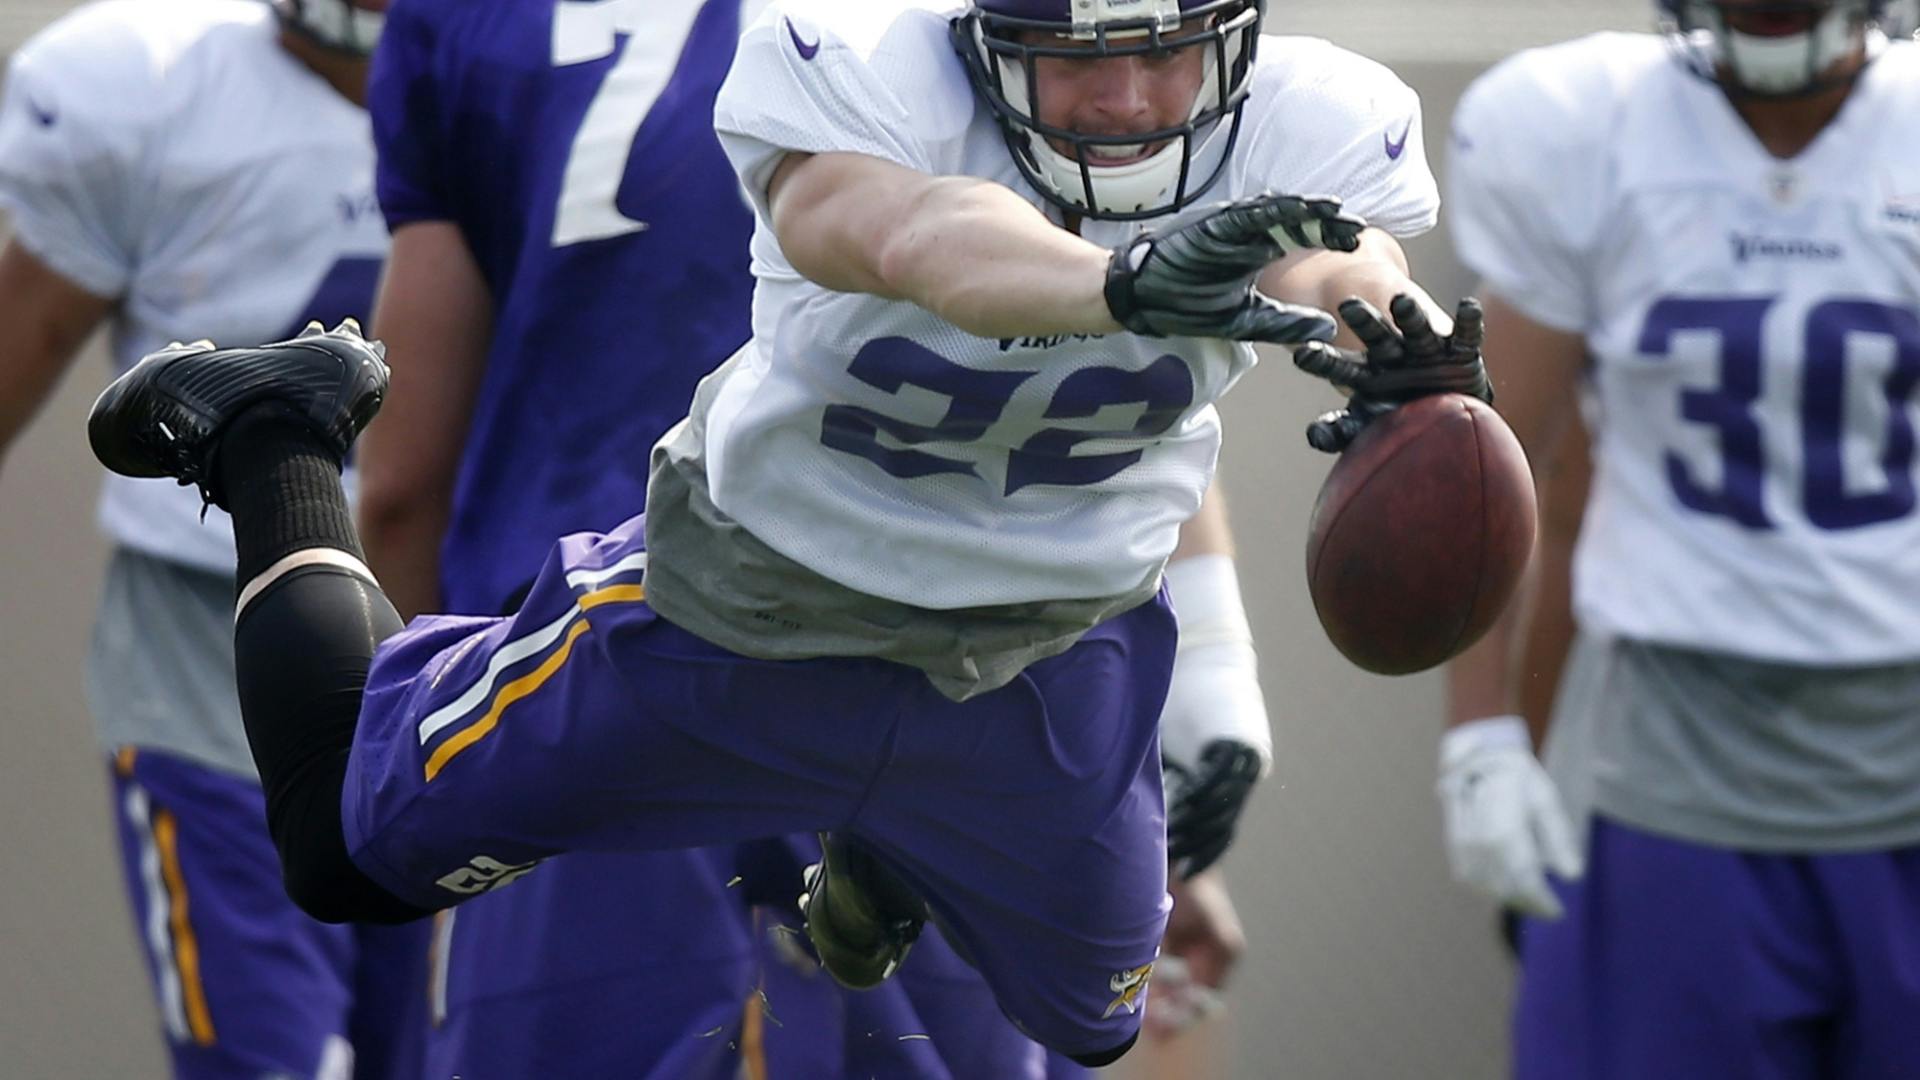 Vikings safety Harrison Smith was in a walking boot last week, but he's expected to play against the Lions on Sunday.